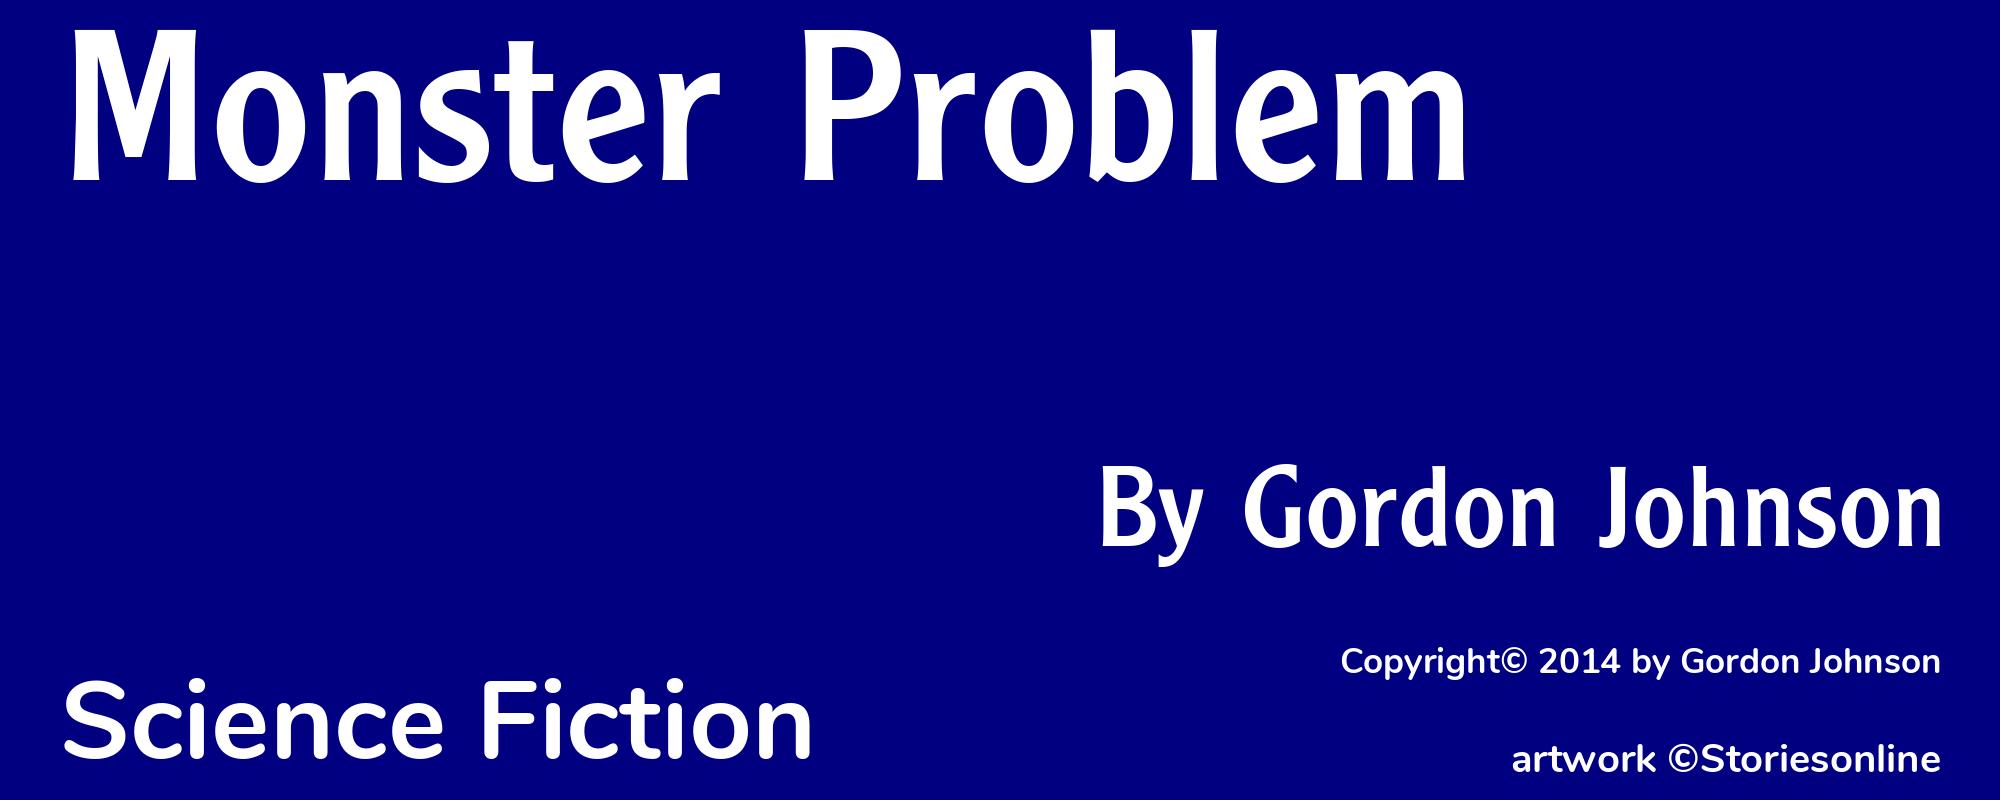 Monster Problem - Cover